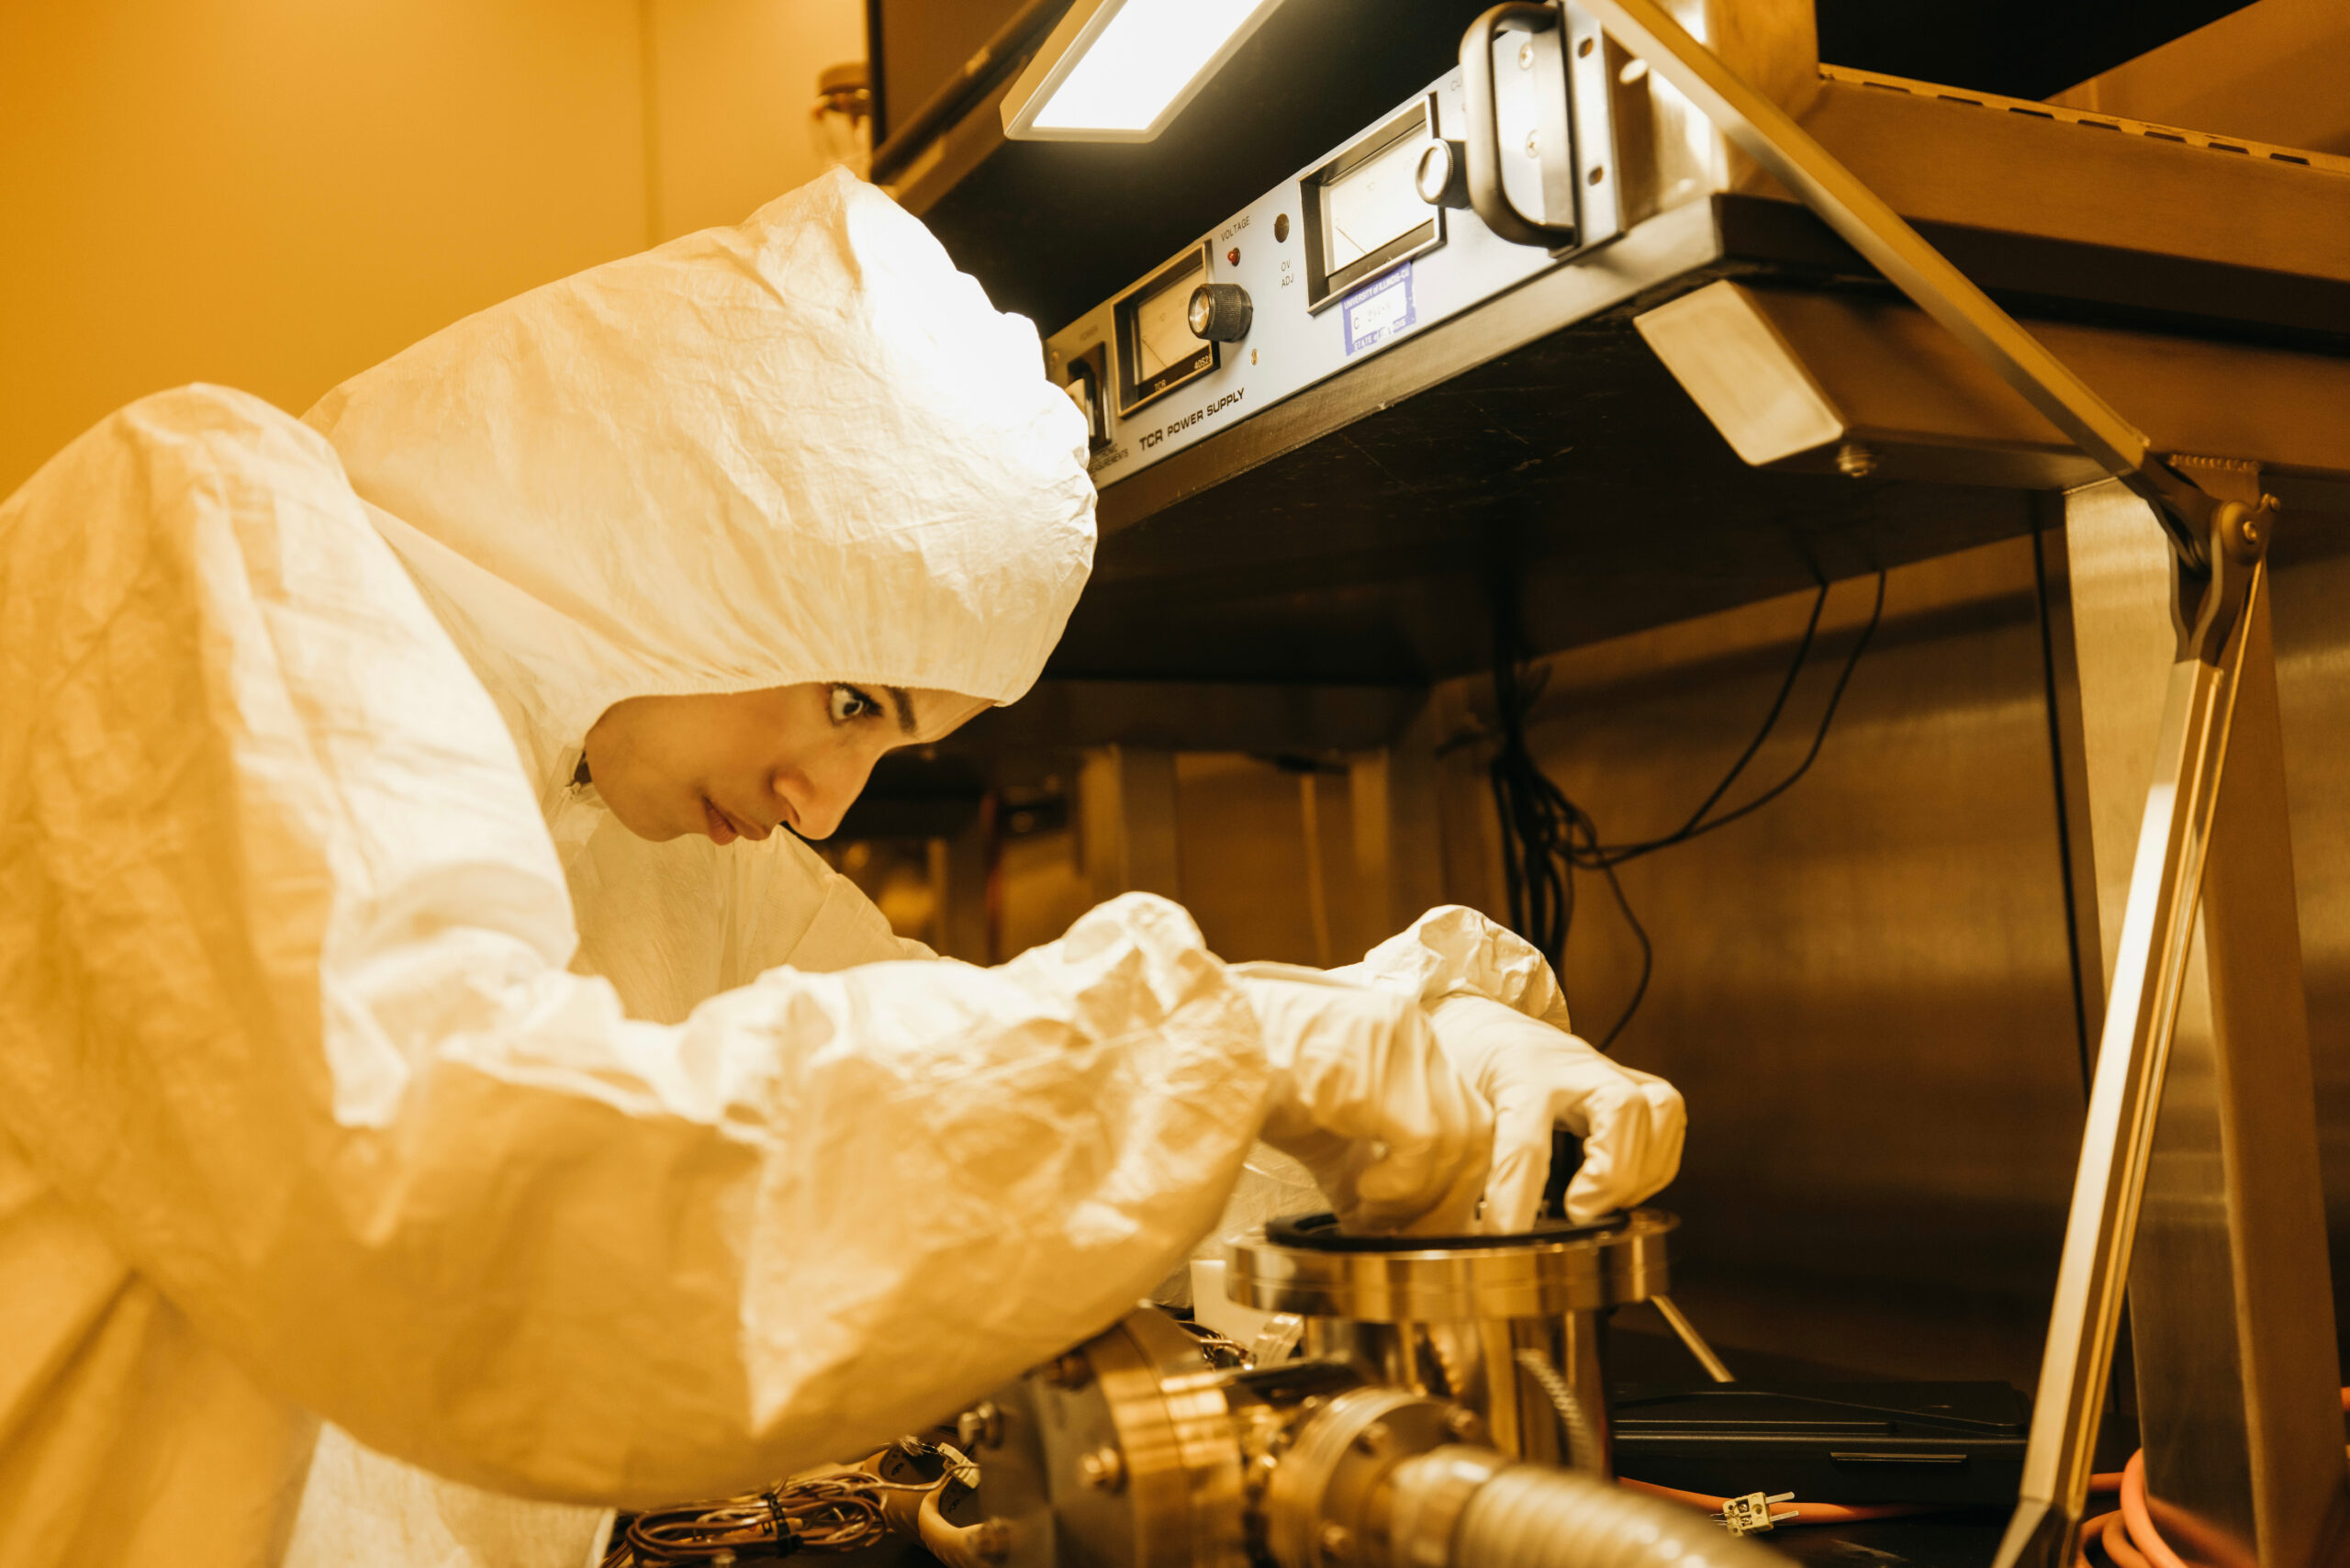 Student in a cleanroom suit working on a project.